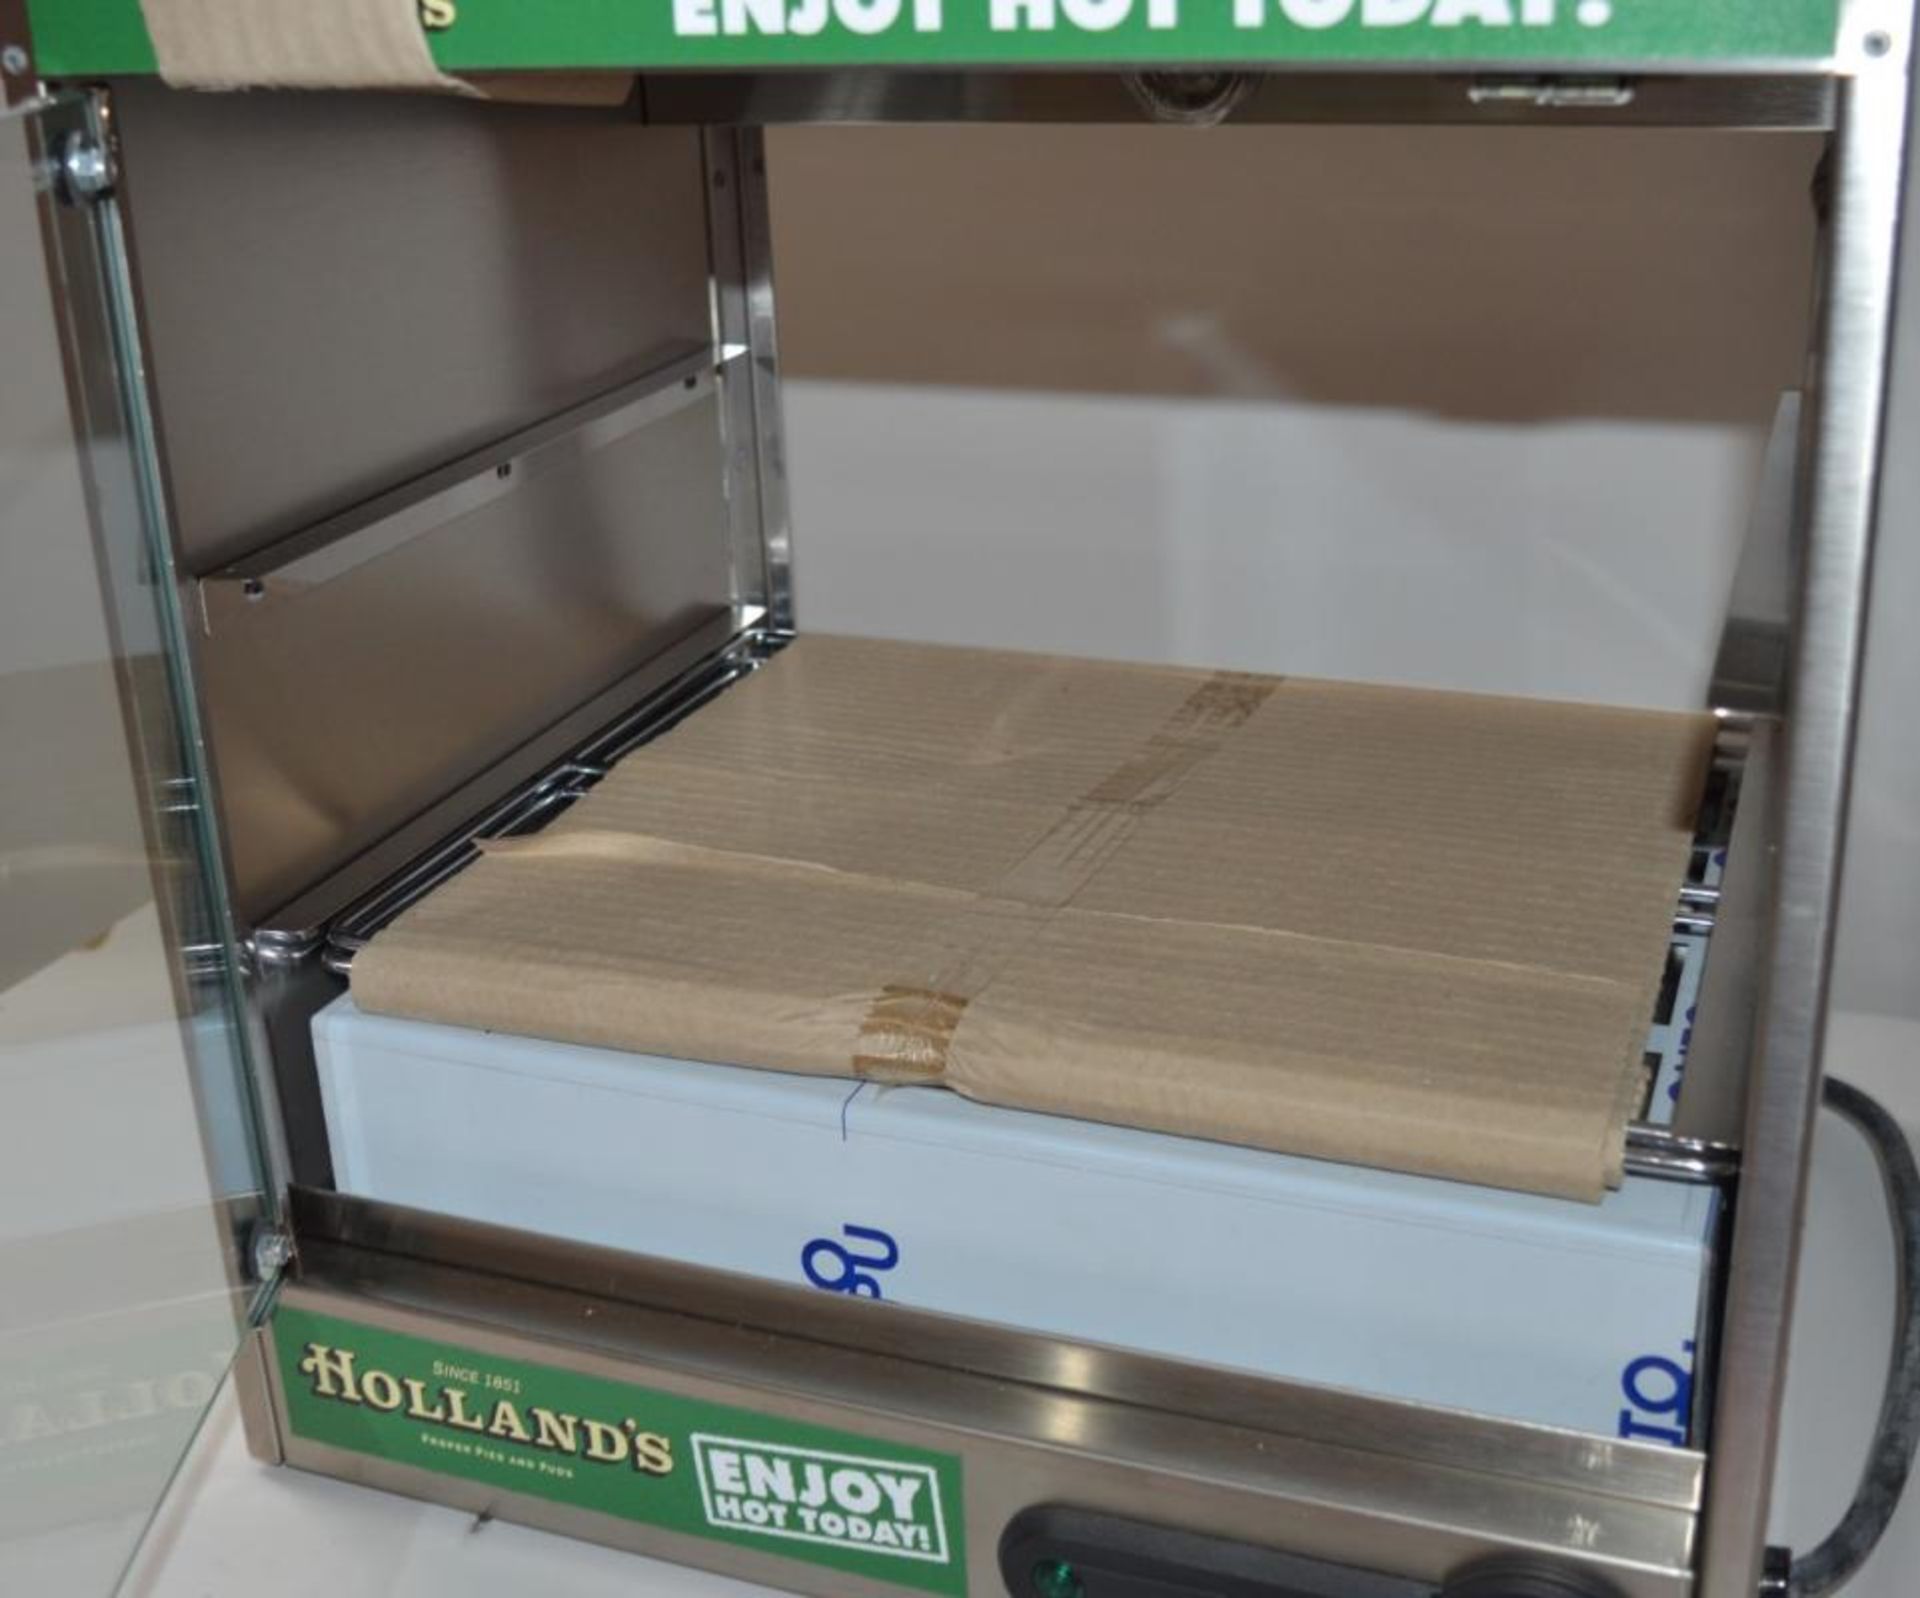 1 x Parry Electric Pie Warming Cabinet - Hollands Pie Edition - New and Unused - Features - Image 2 of 9